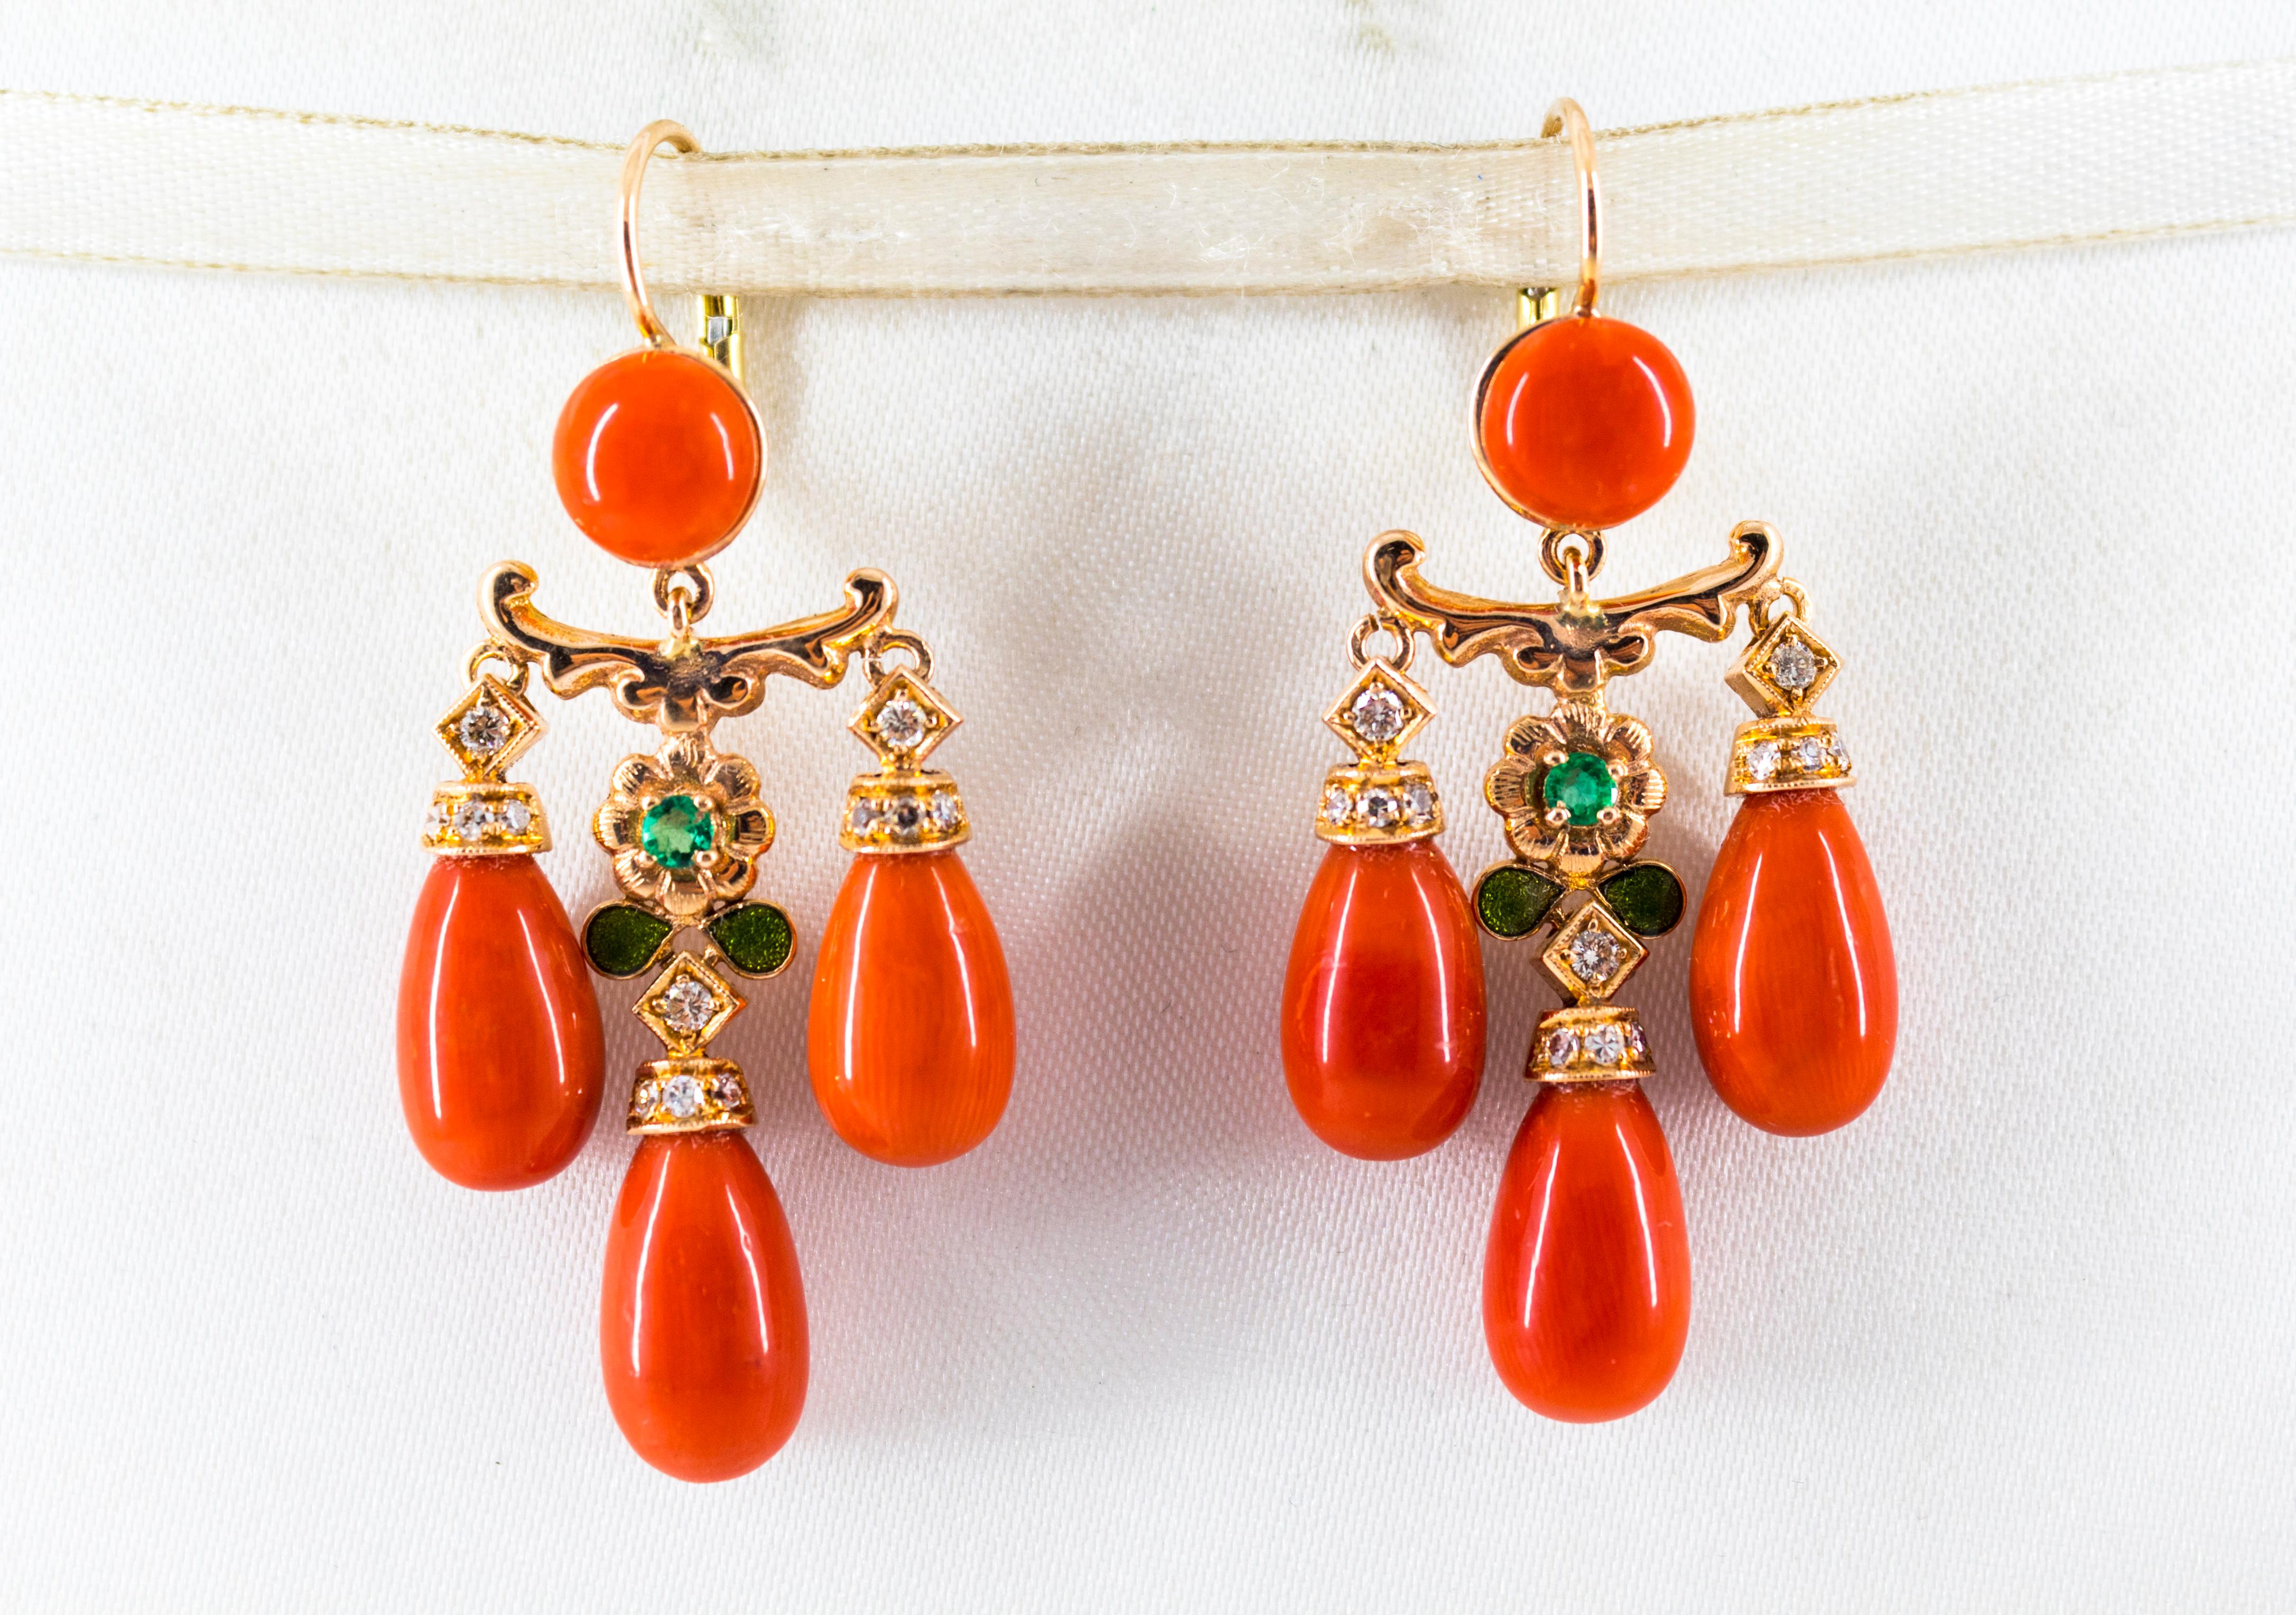 These Lever-Back Earrings are made of 14K Yellow Gold.
These Earrings have 0.26 Carats of White Diamonds.
These Earrings have 0.18 Carats of Emeralds.
These Earrings have Red Mediterranean (Sardinia, Italy) Coral and Enamel.
All our Earrings have